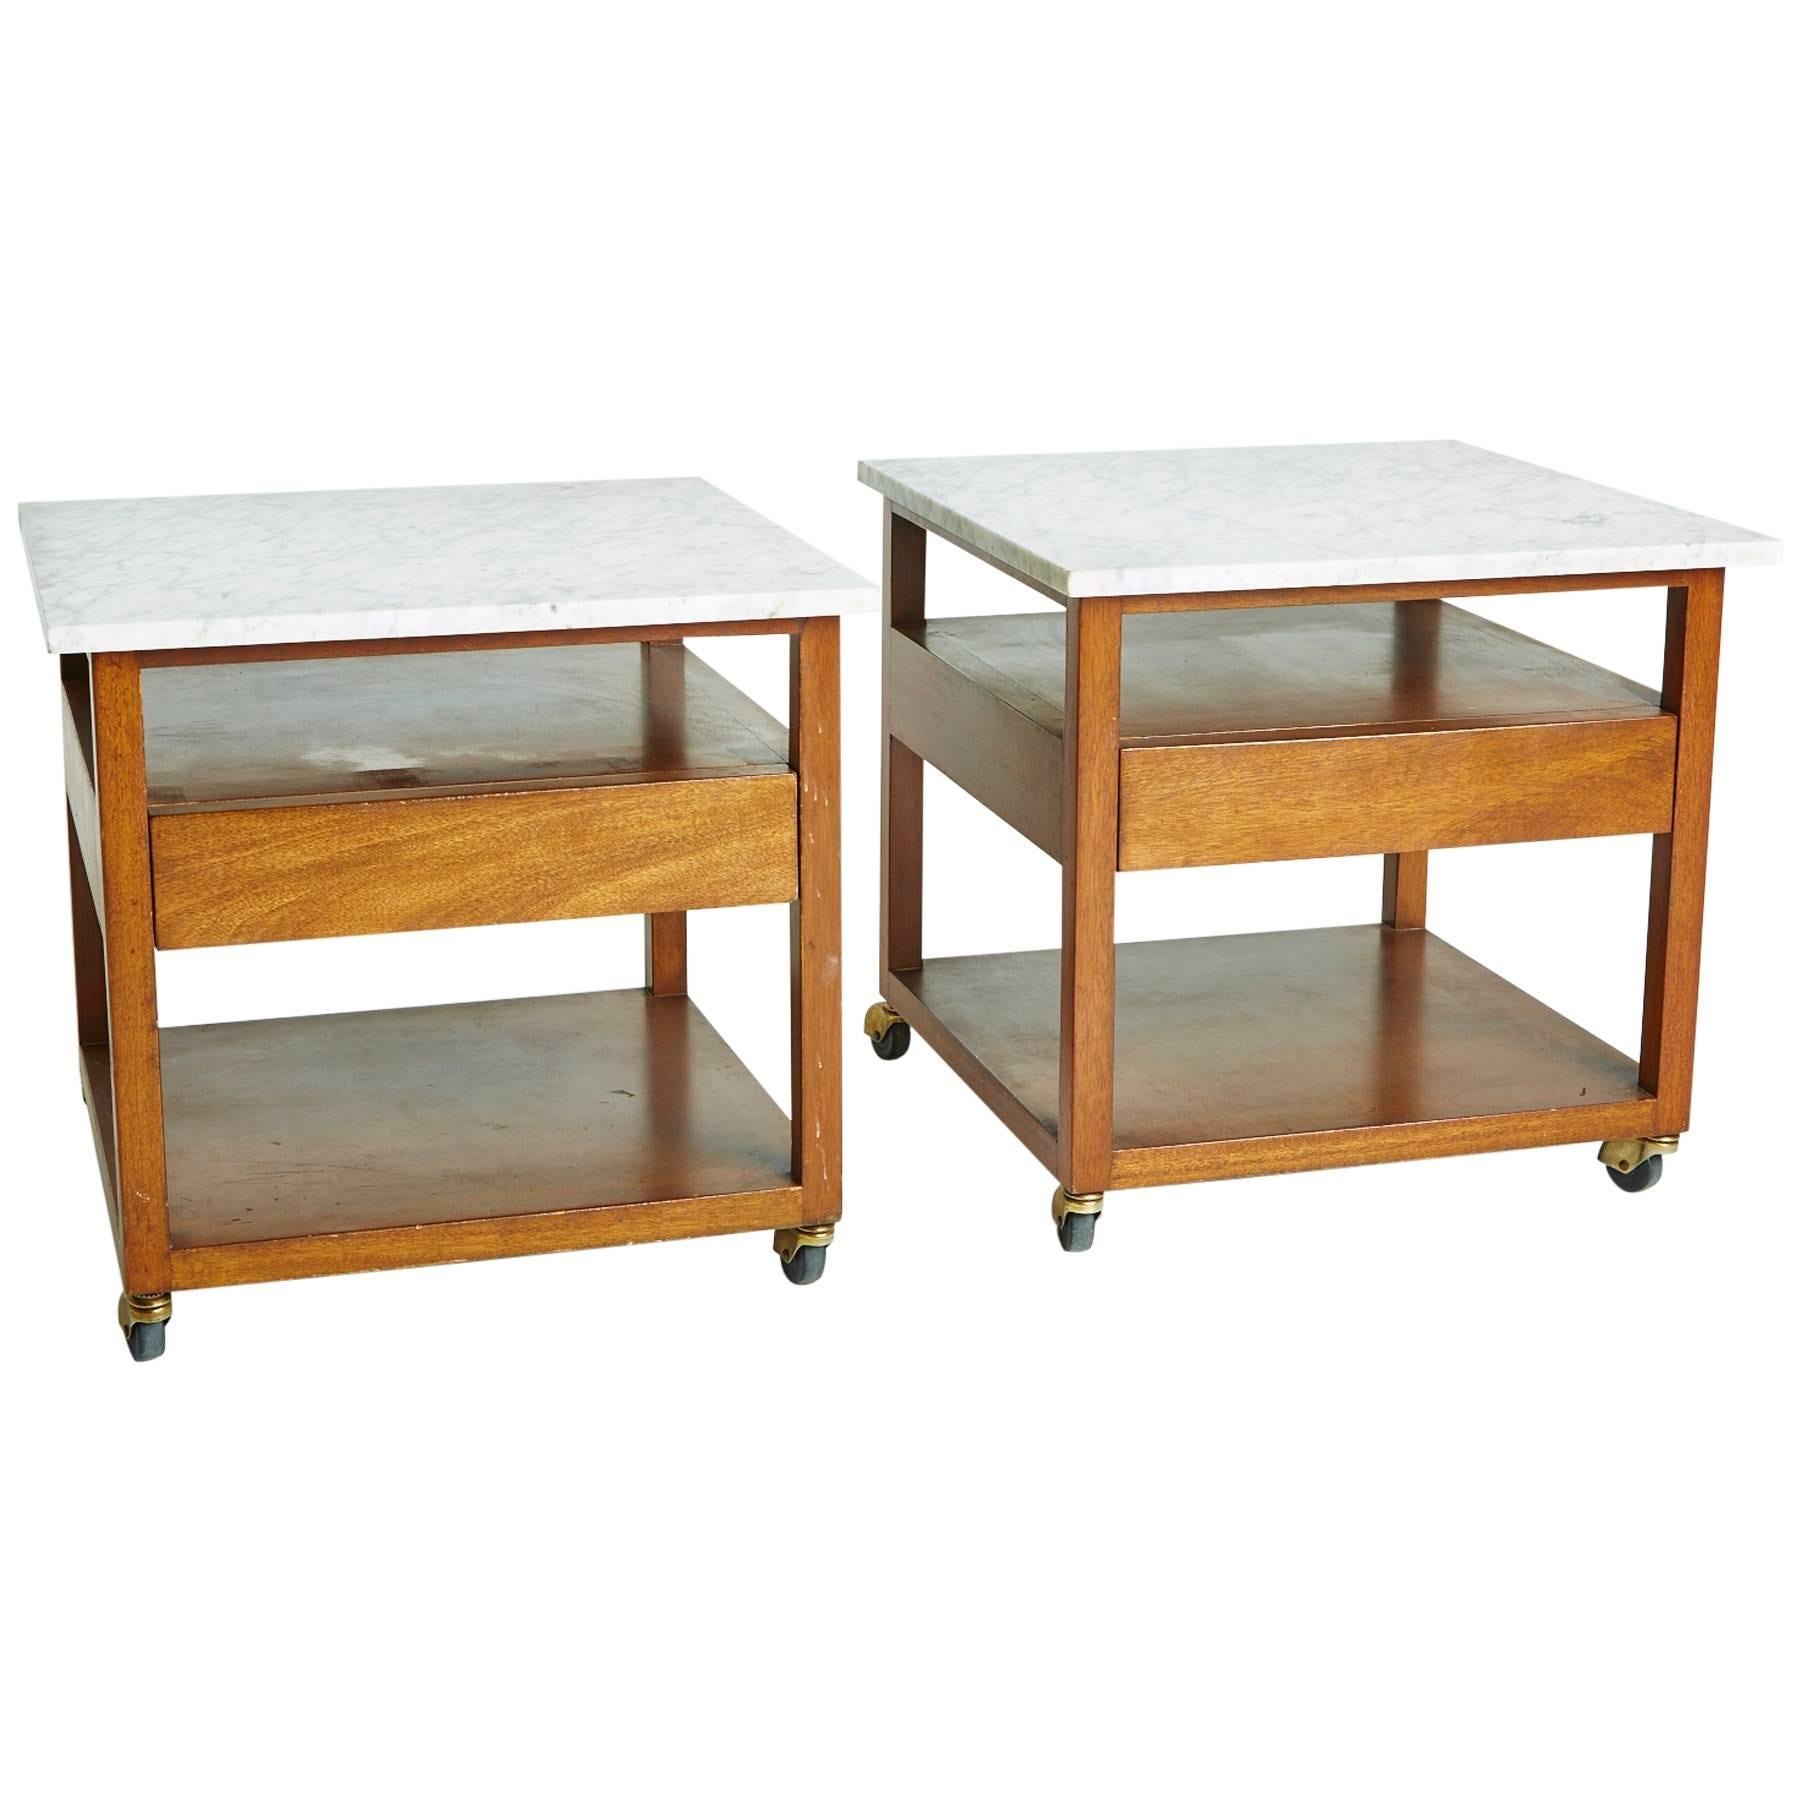 Designed by Harvey Probber, circa 1950s, this pair works perfectly as end tables, side tables, or nightstands. Each table's square wood frames have a small drawer and two platforms for display or storage. The honey-colored wood is an attractive